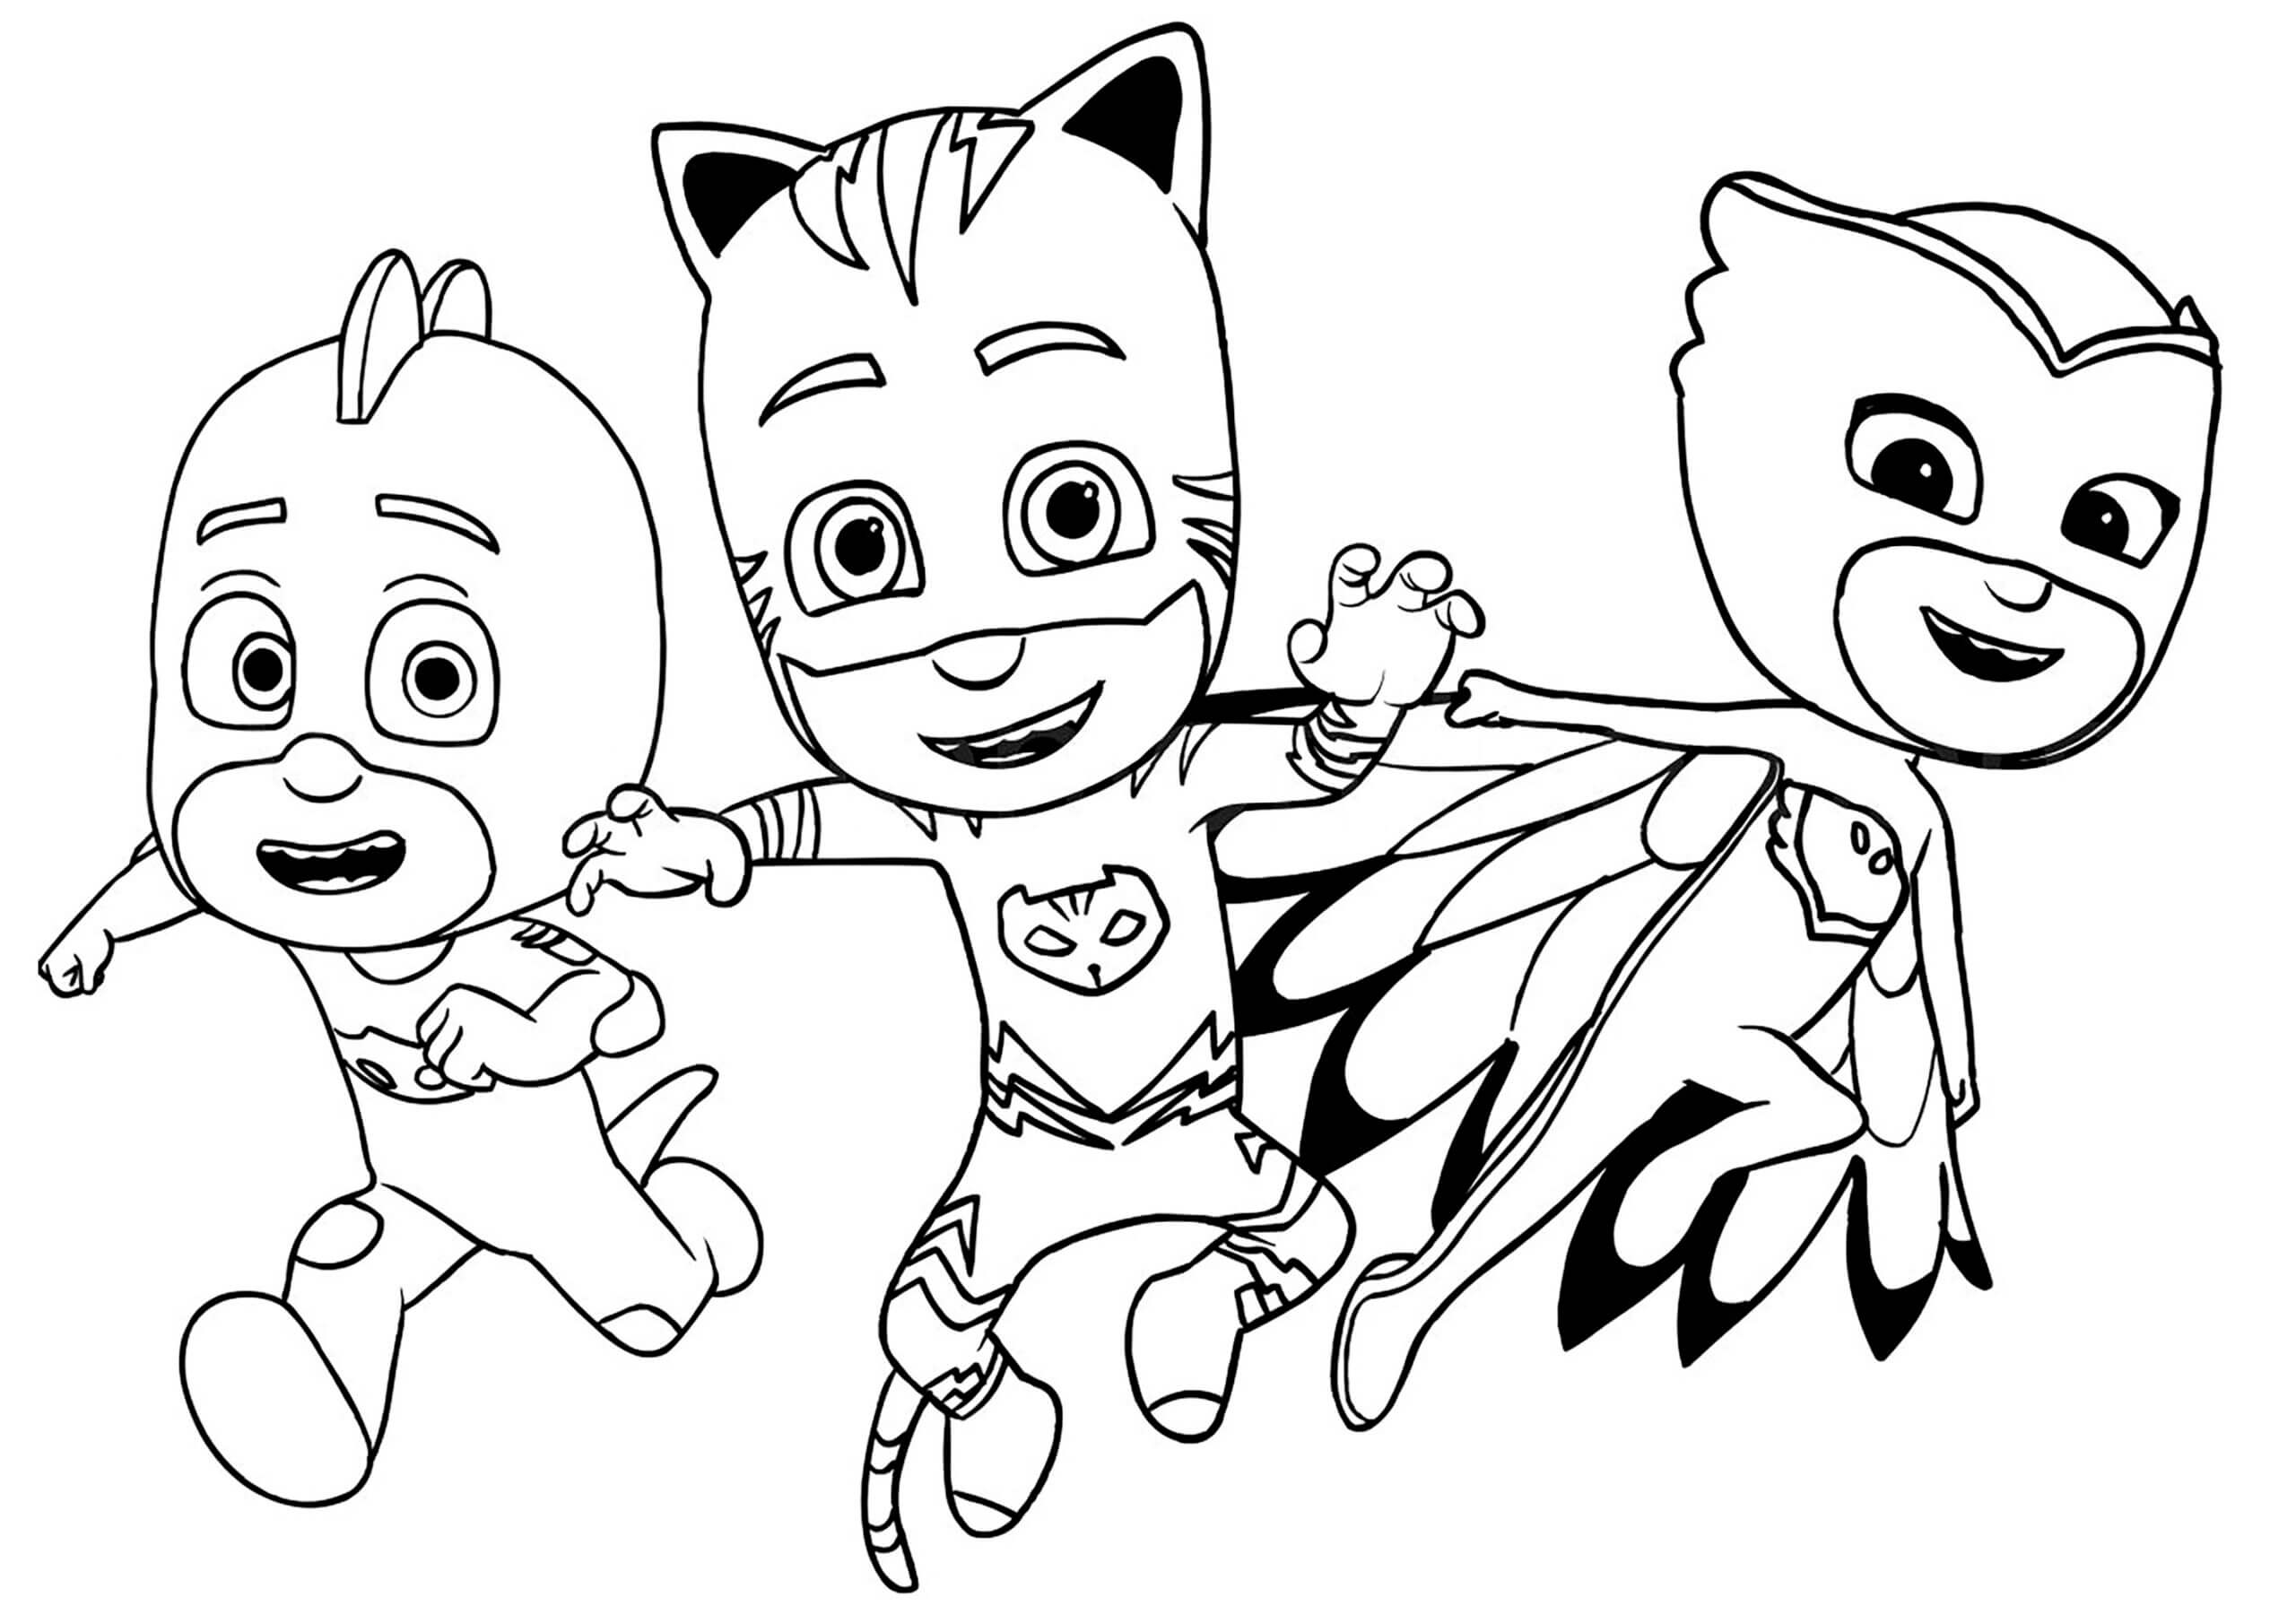 Pj Masks Coloring Page Scaled